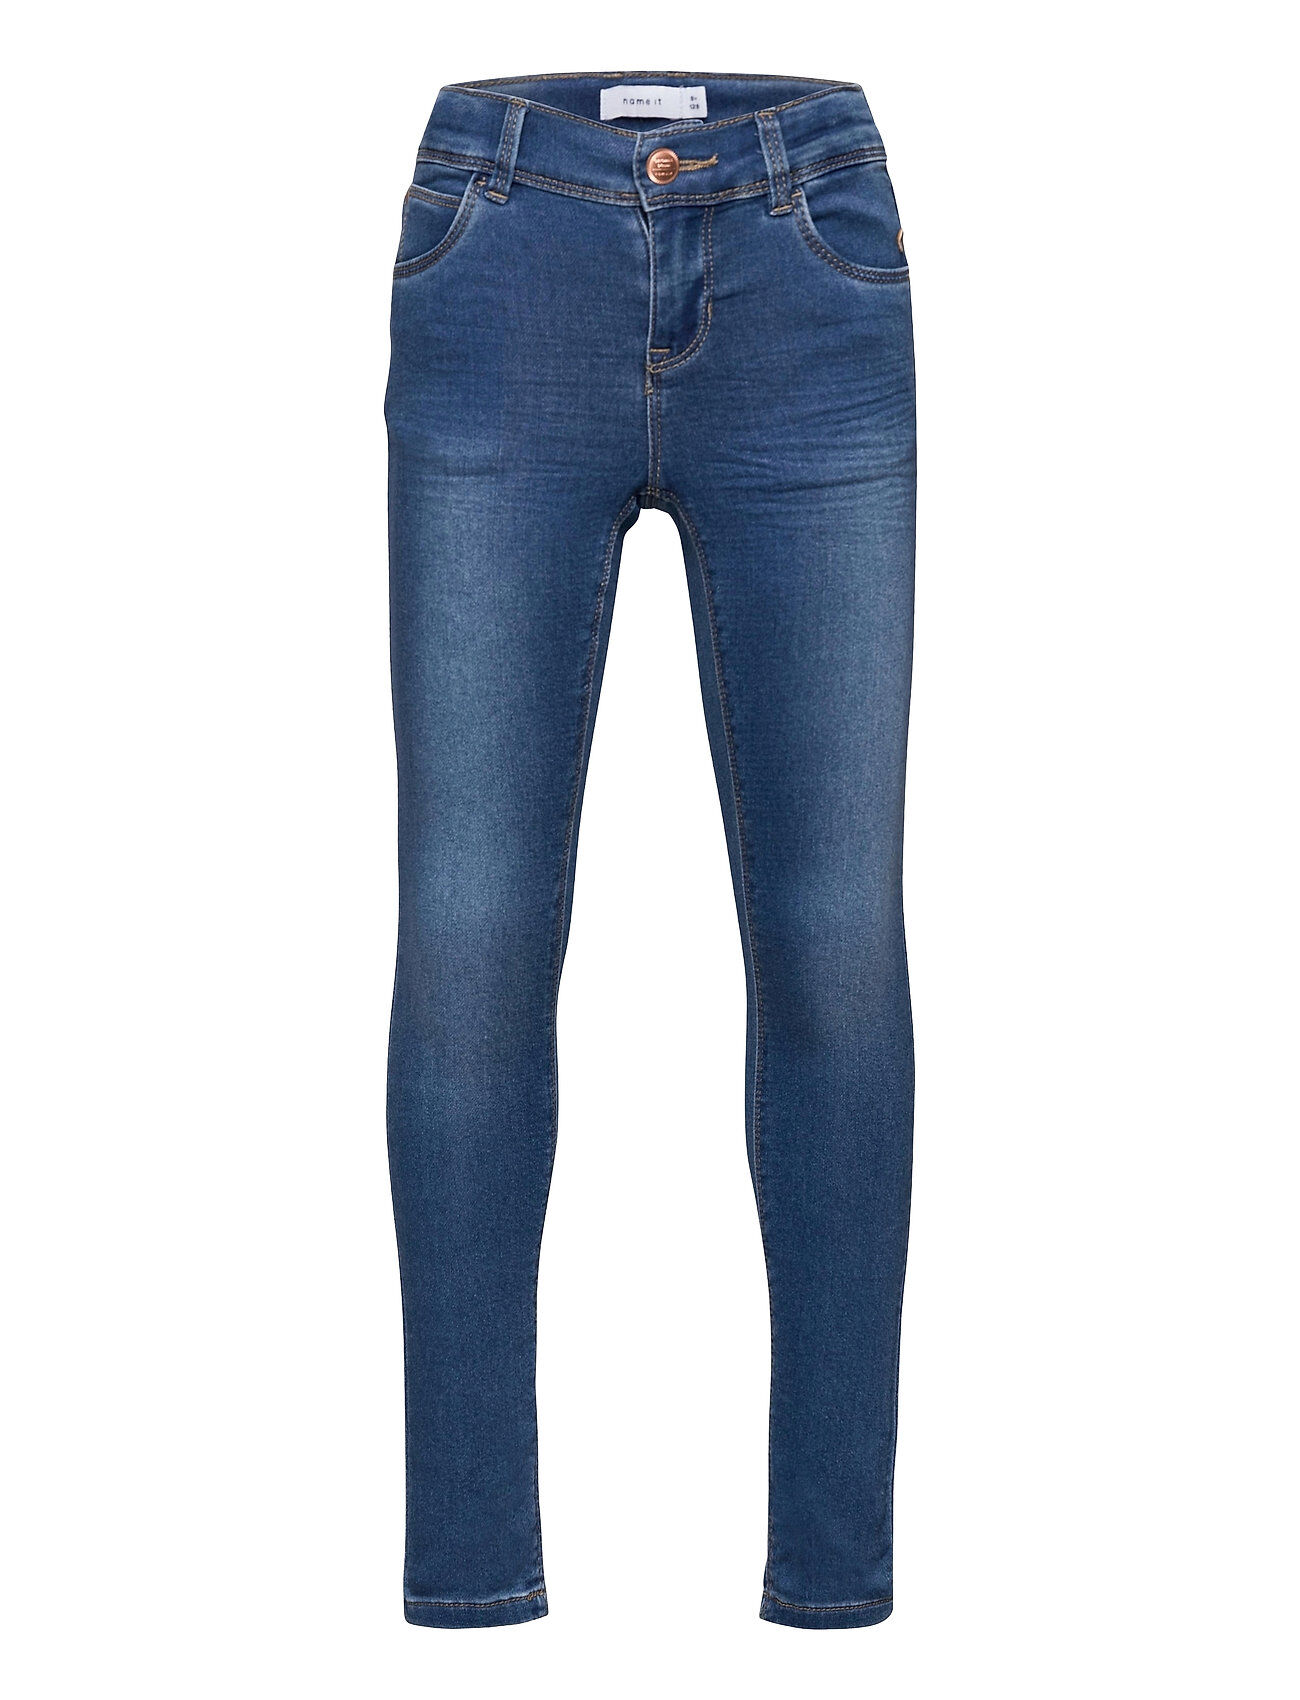 name it Nkfpolly Dnmthayers 2482 Swe Pant Noos Jeans Slim Jeans Blå Name It